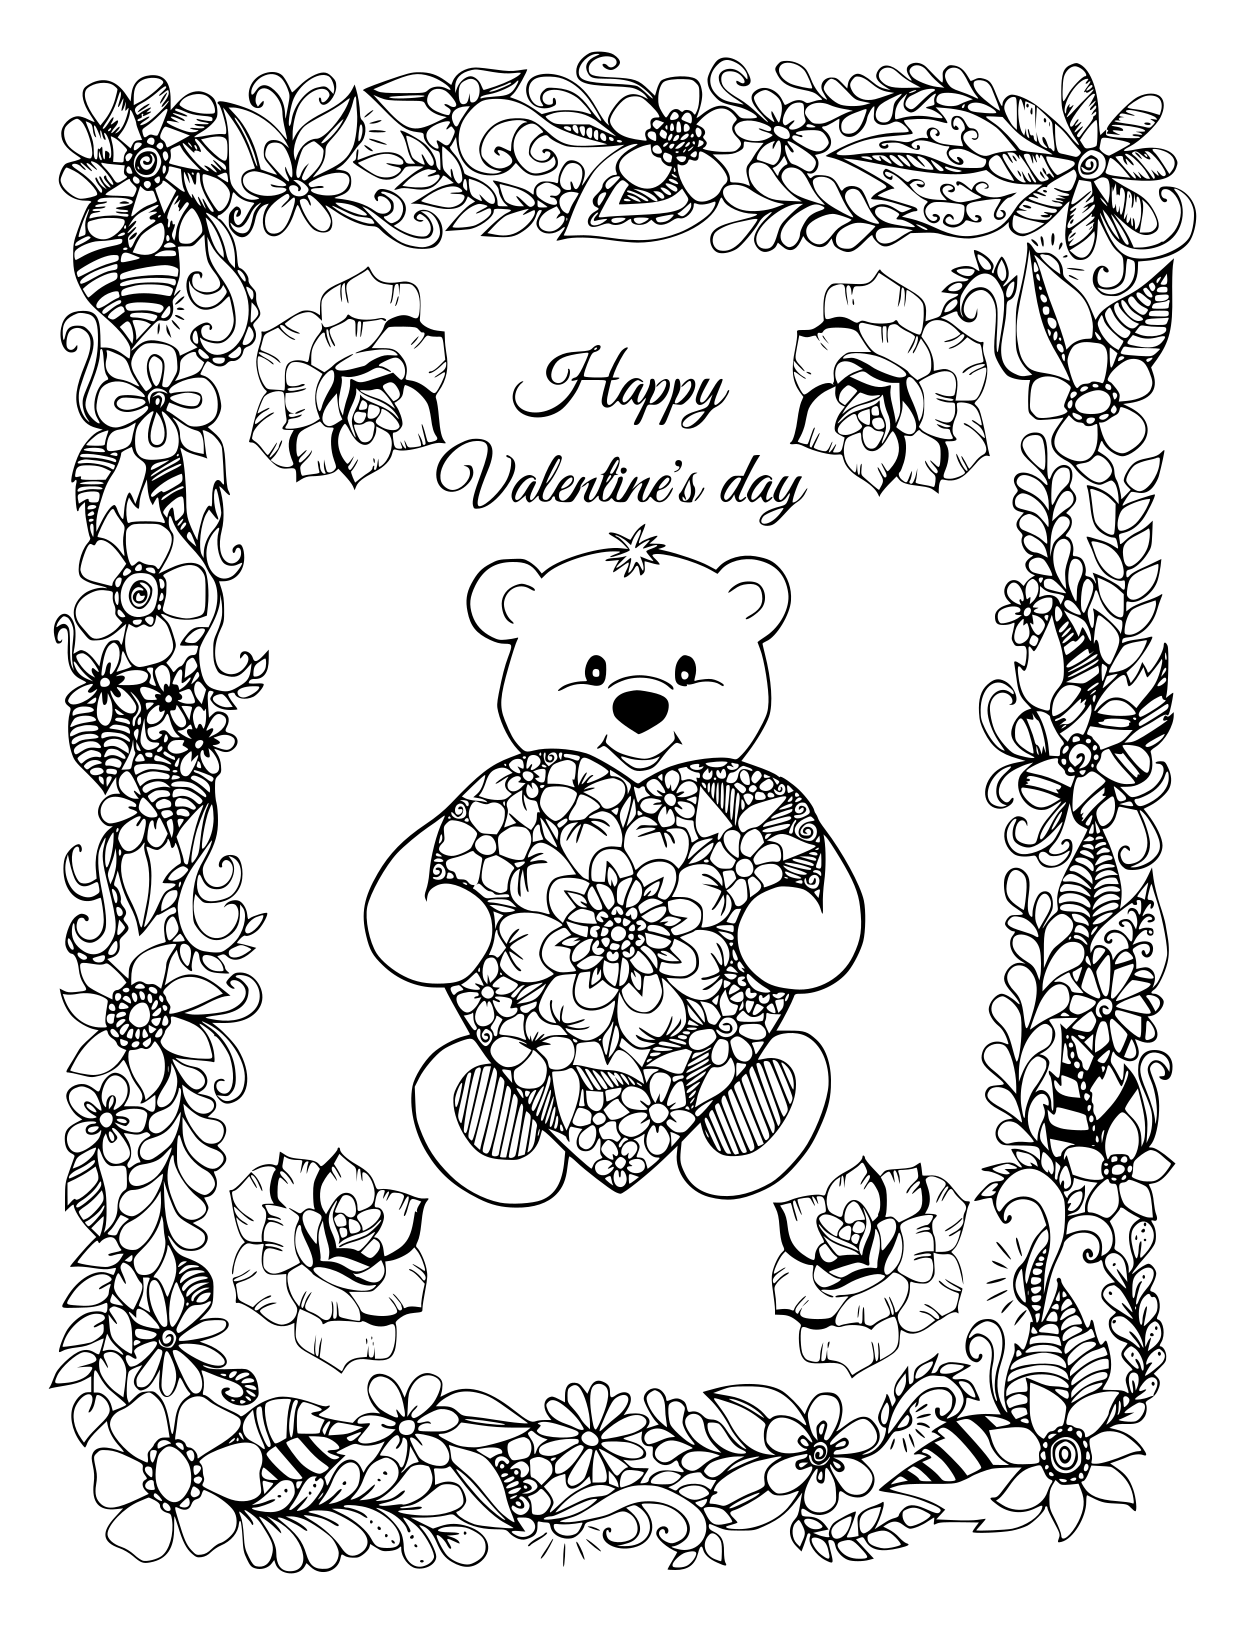 Illustration Valentines A Teddy Bear With A Heart In A Frame From Flowers Coloring Page